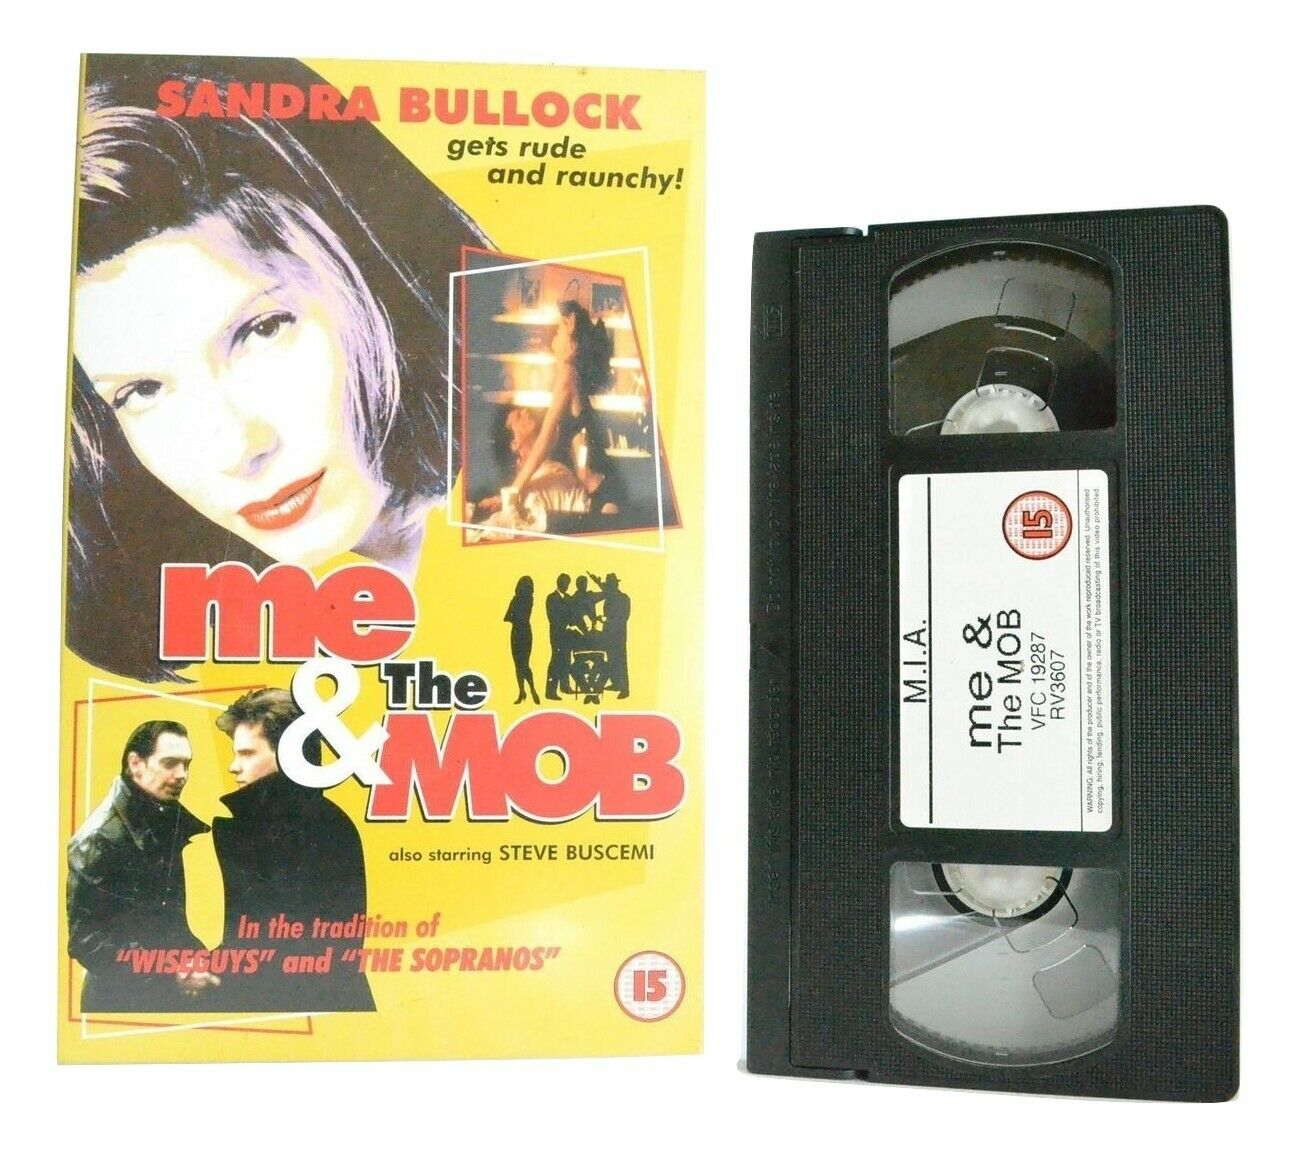 Me And The Mob: S.Bullock/S.Buscemi - "The Sopranos" Style - Large Box - VHS-